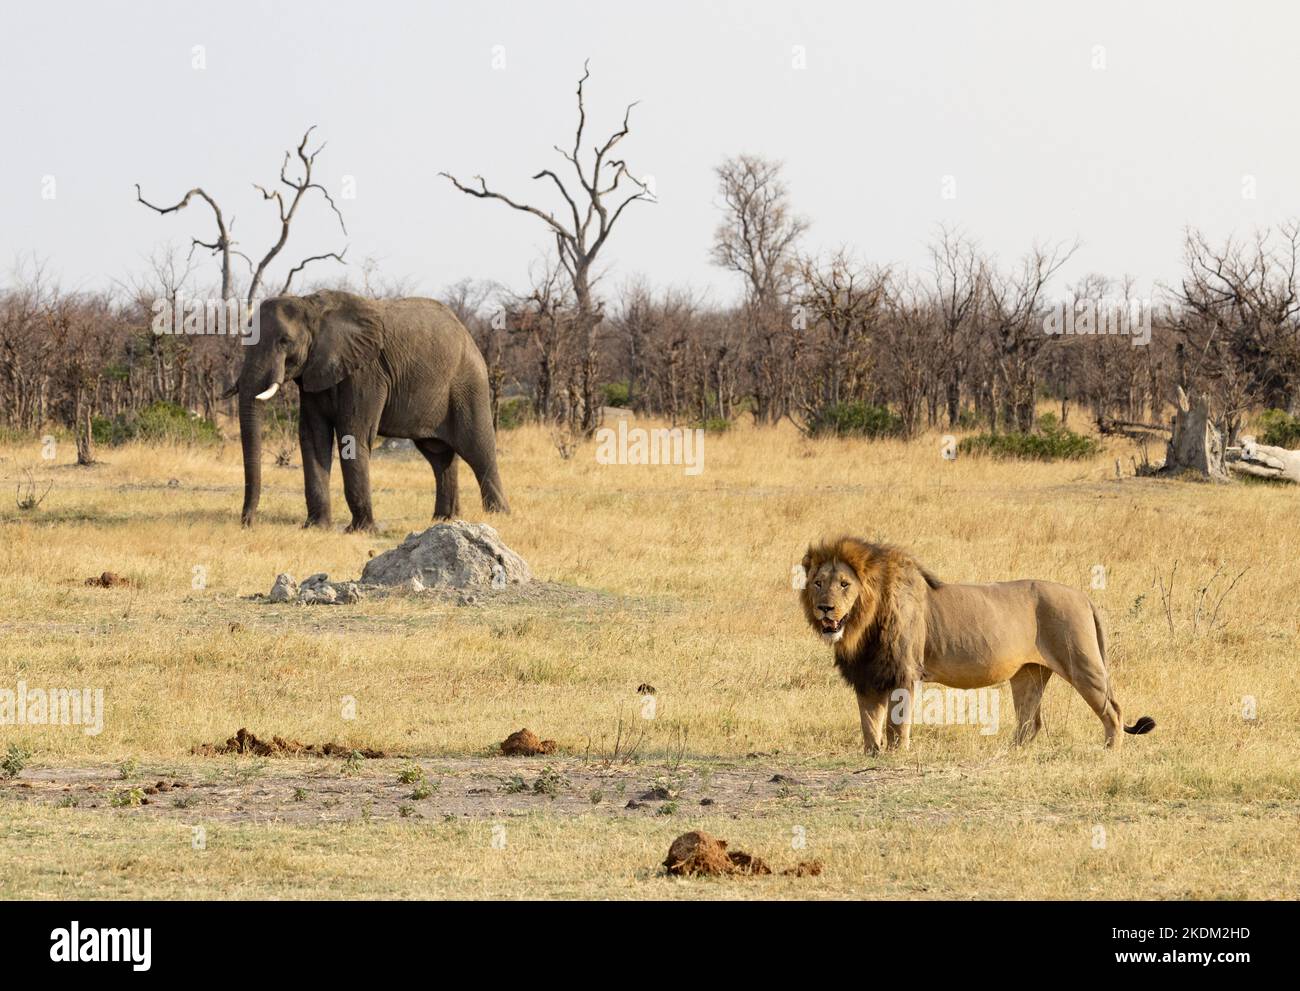 Africa landscape - with adult male lion and elephant in grasslands; Chobe National Park, Botswana Africa. African animals scene. Stock Photo